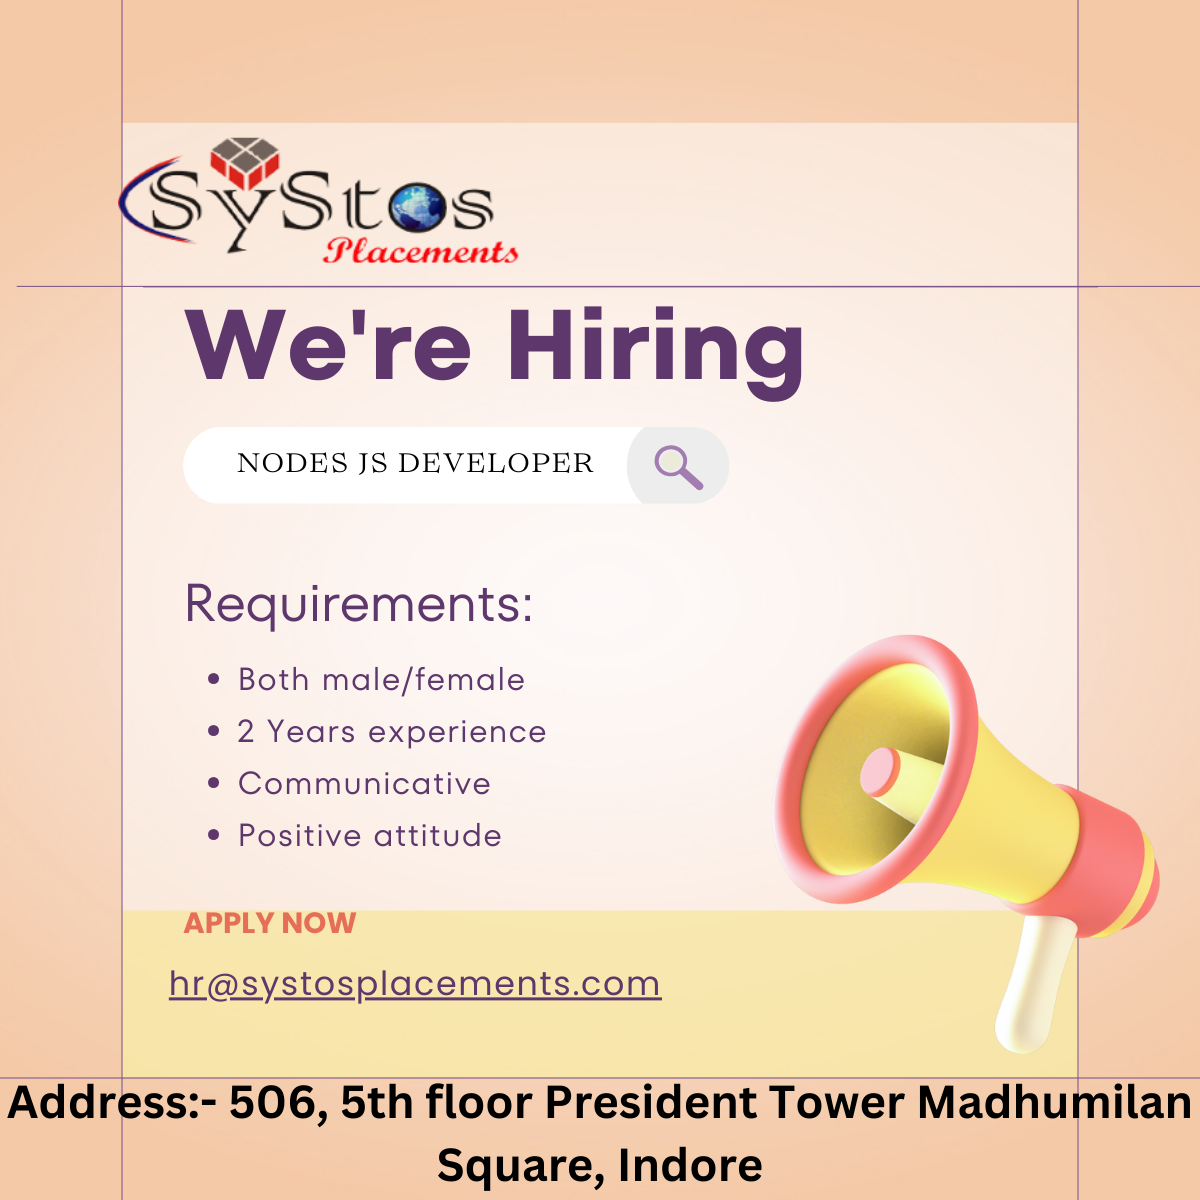 SY Stes

We're Hiring

NODES JS DEVELOPER Q

Requirements:

e Both male/female

e 2 Years experience «

e Communicative

e Positive attitude 4 J
APPLY NOW vw

hr@systosplacements.com

Address:- 506, 5th floor President Tower Madhumilan
Square, Indore